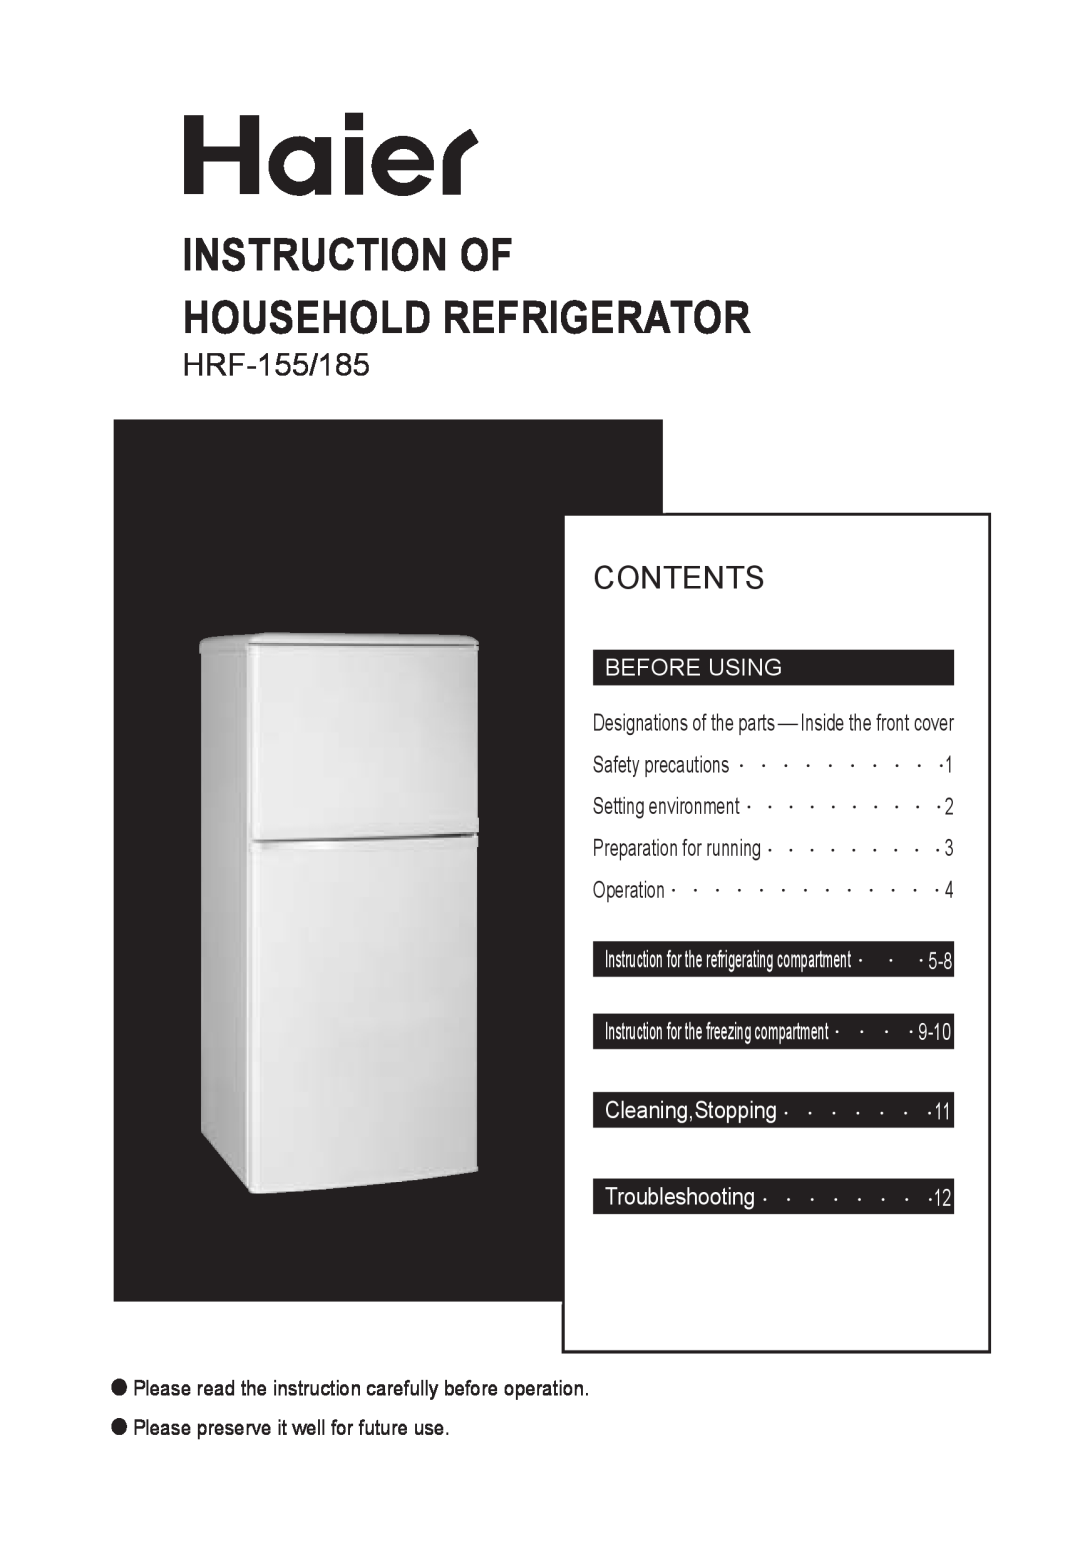 Haier manual HRF-155/185 CONTENTS, Instruction Of Household Refrigerator, Before Using, 9-10, Cleaning,Stopping 